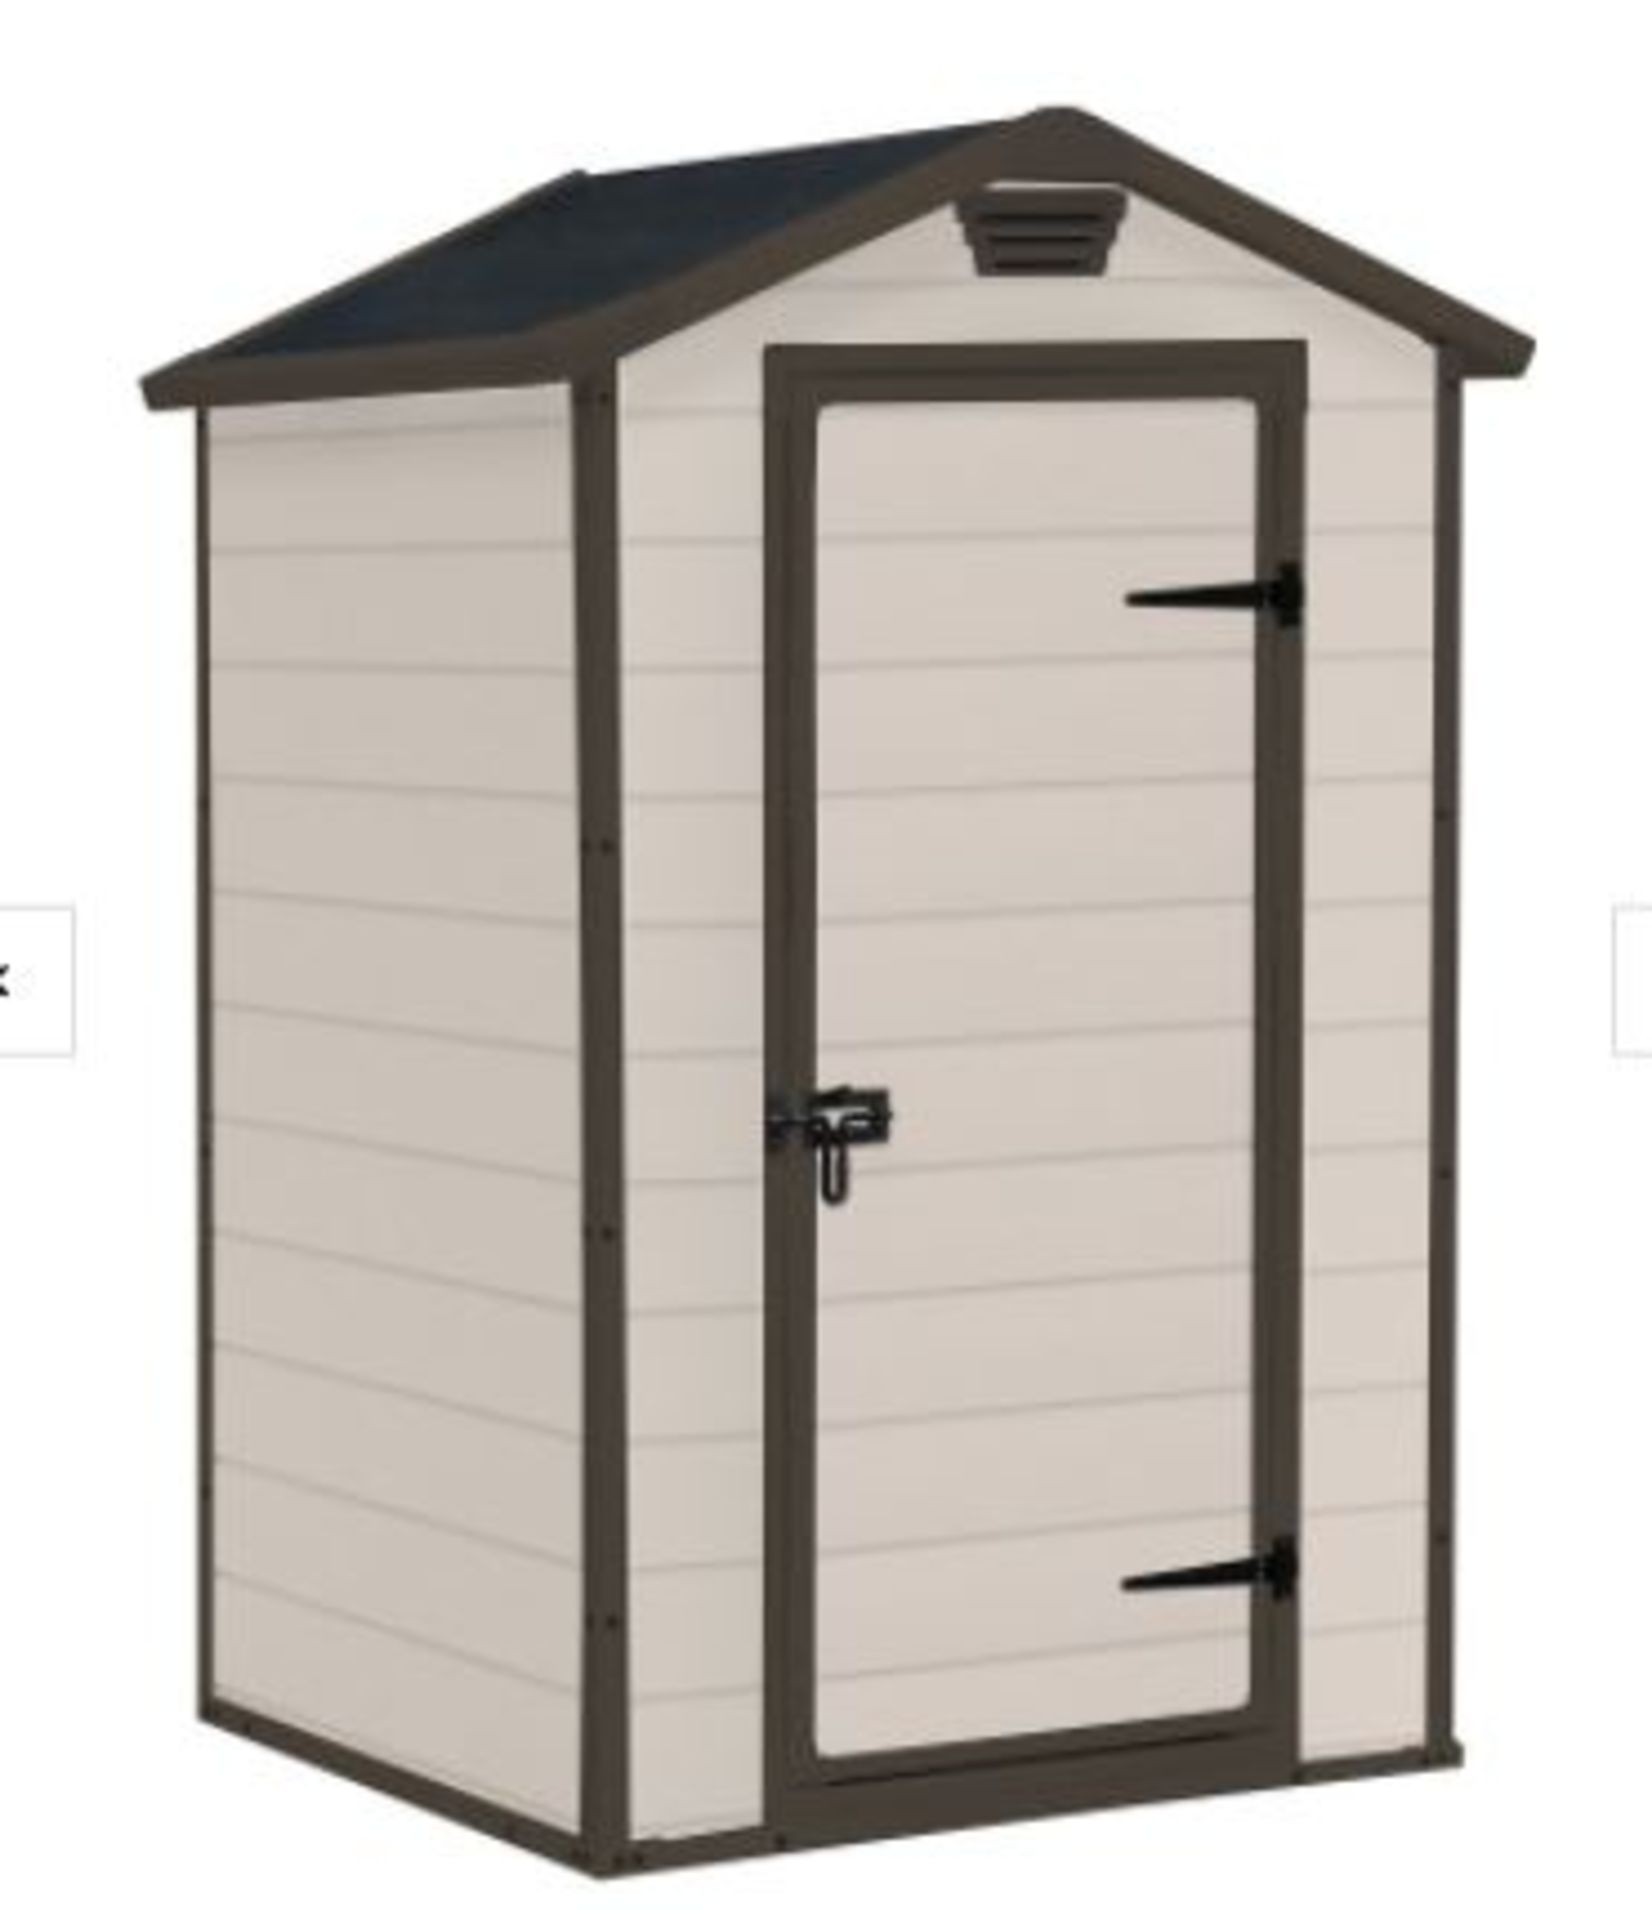 (R9) Garden . 1 X Keter Manor 4 X 3 Maintenance Free Shed (W129 X D103 X H196cm) RRP £240 - Image 2 of 5